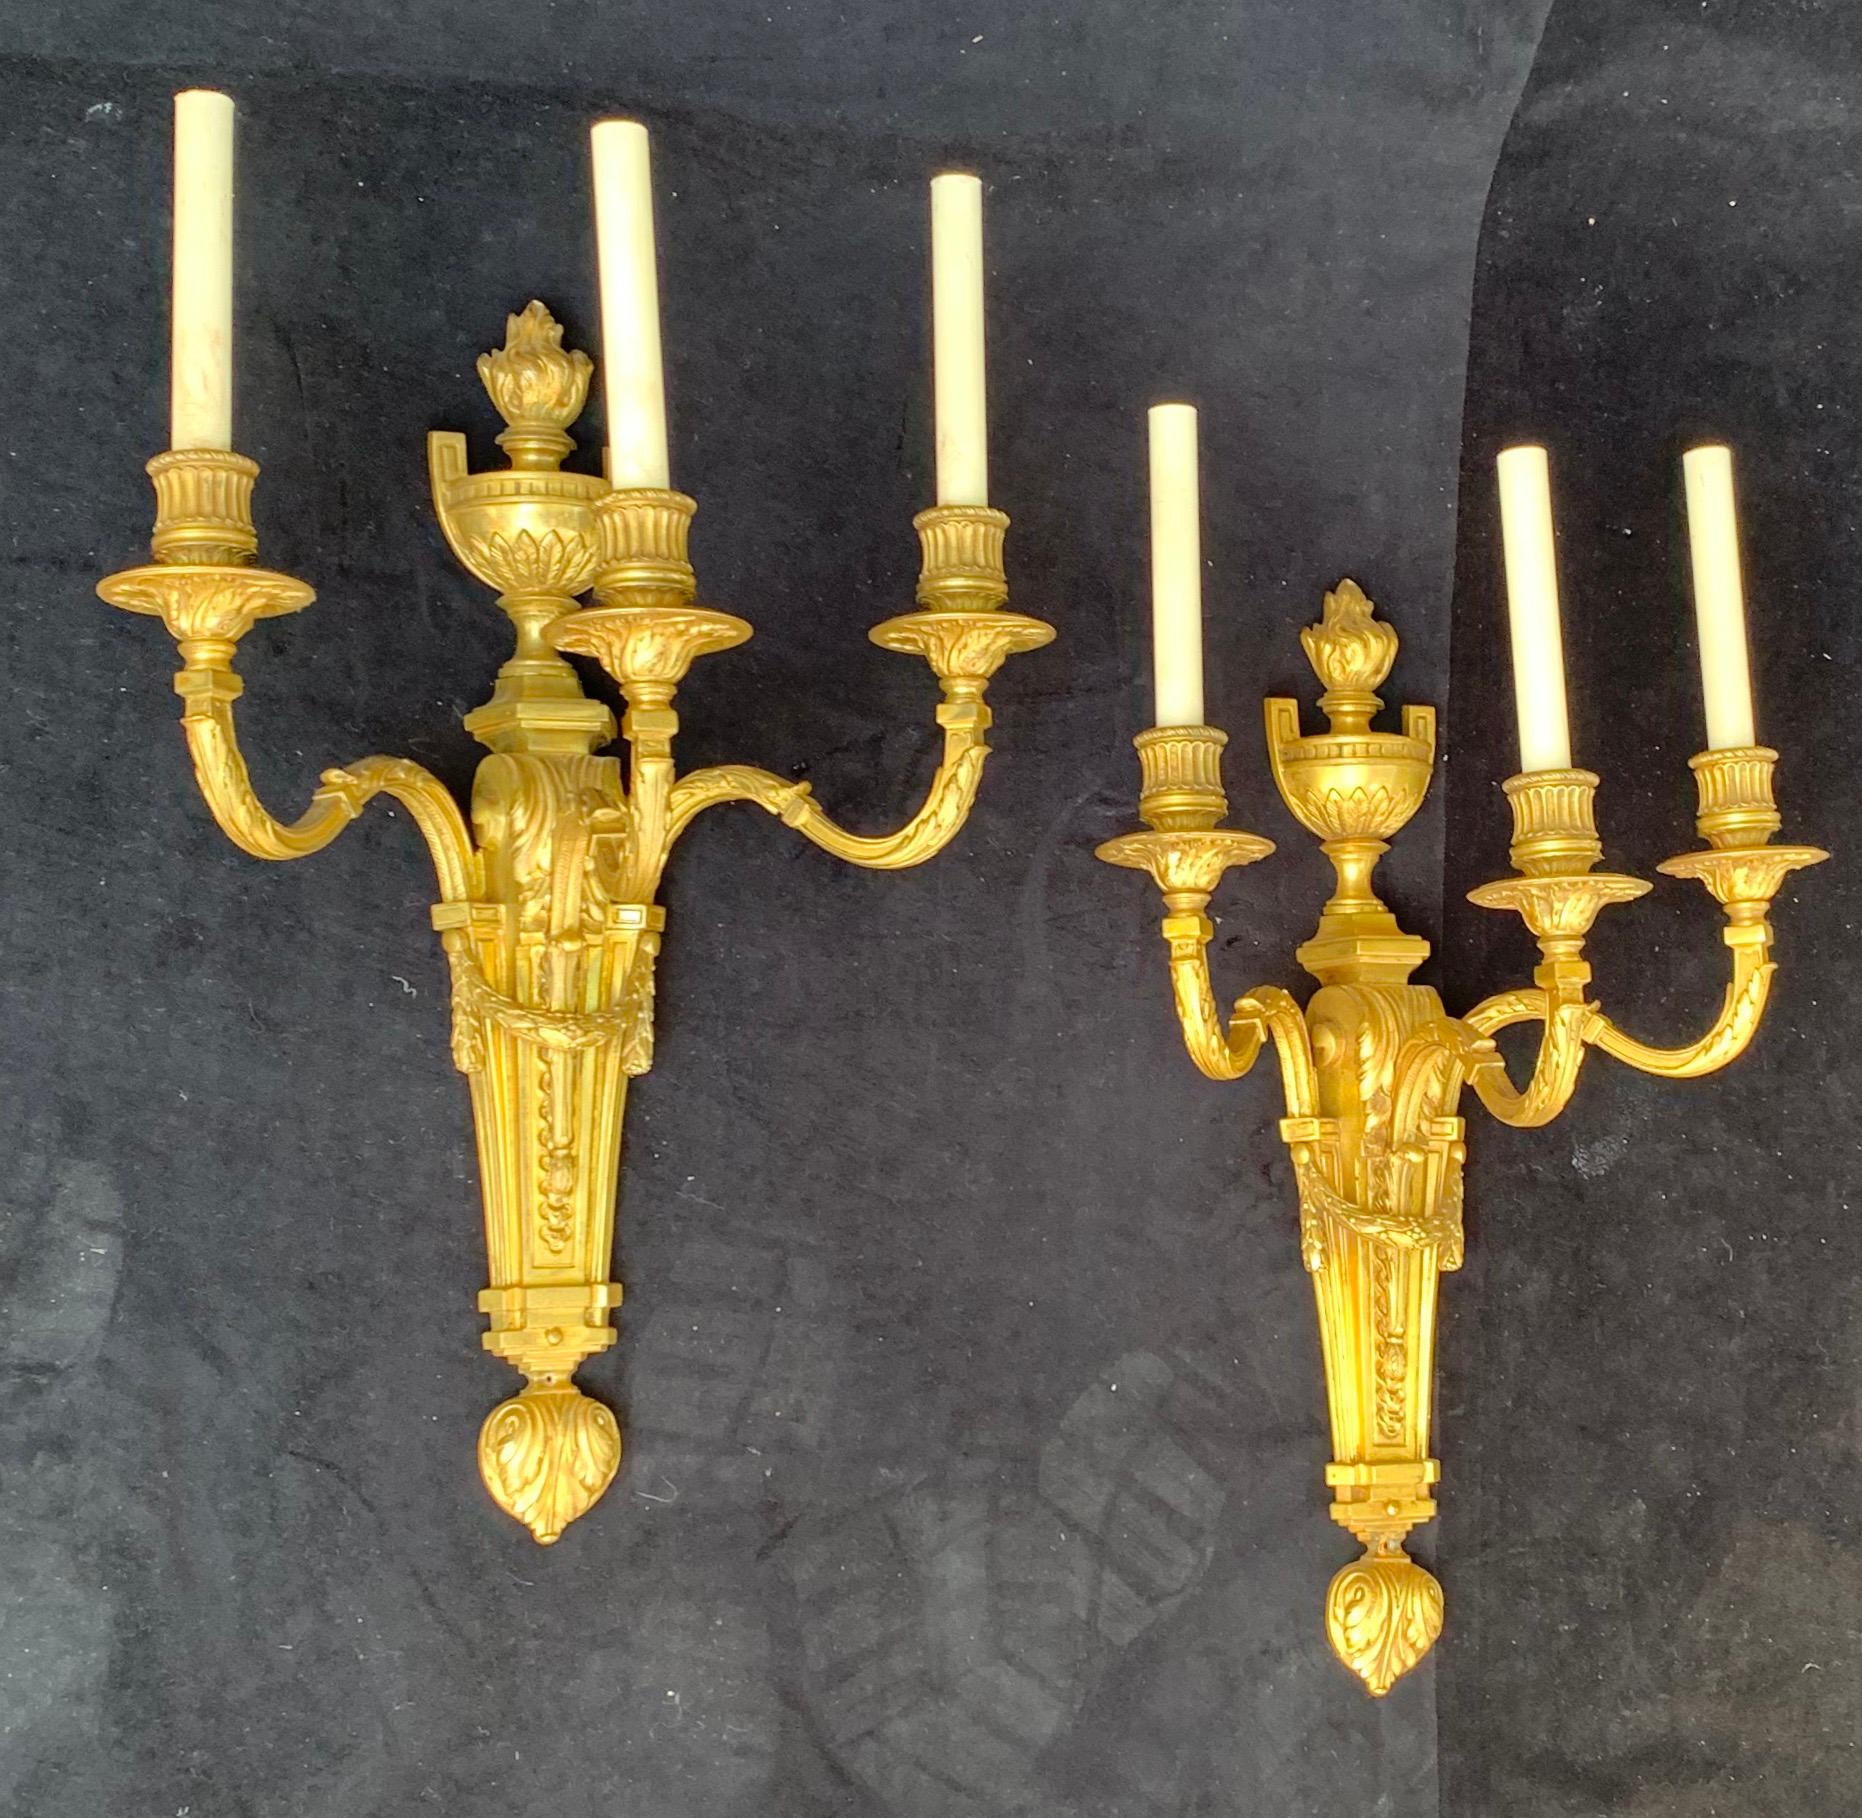 A wonderful large pair of French style urn top garland swag neoclassical bronze E.F. Caldwell stamped sconces each with 3 candelabra lights, rewired and ready to enjoy.